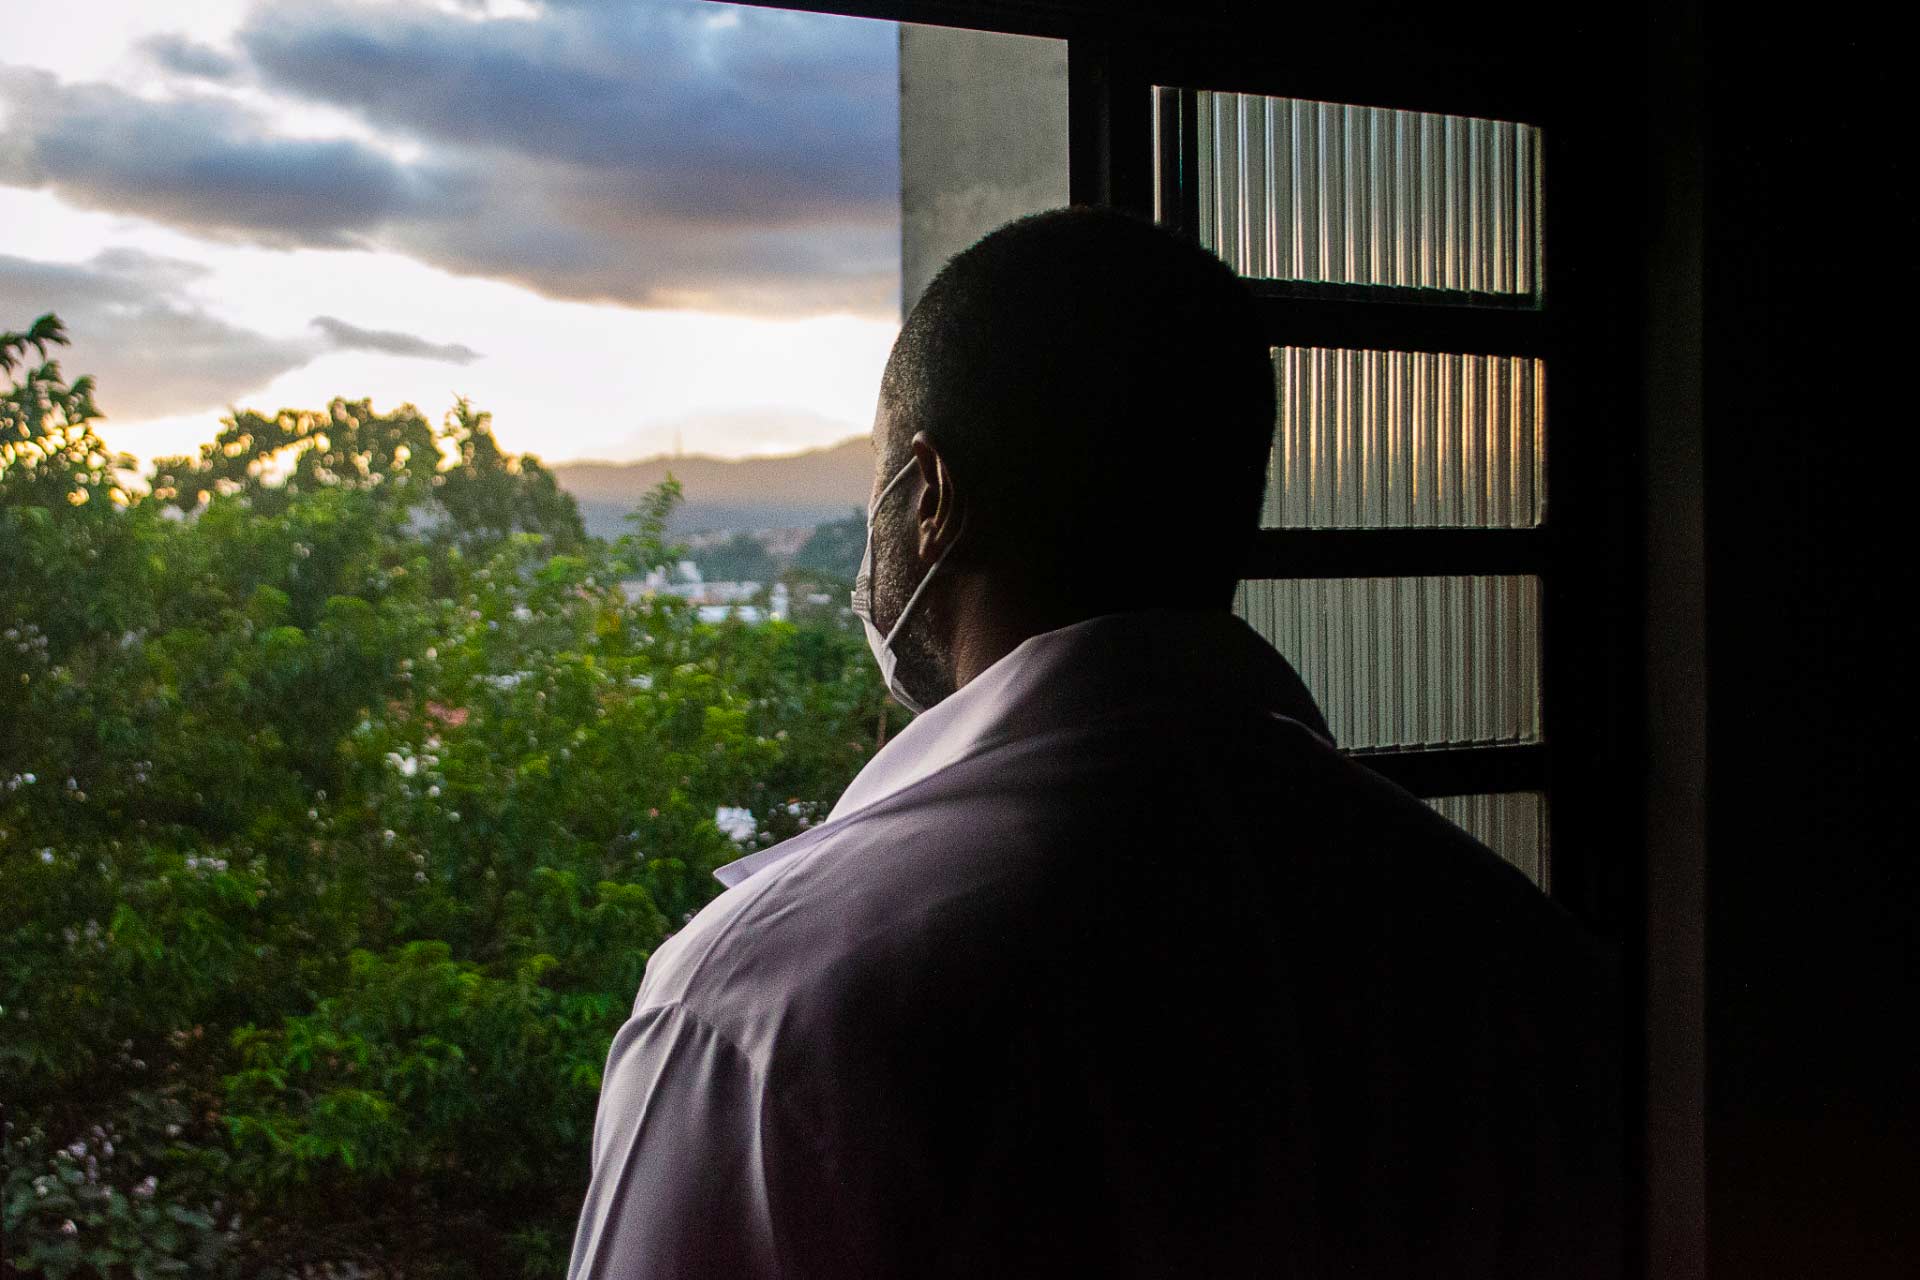 A Black veteran stares out a window from a darkened room.